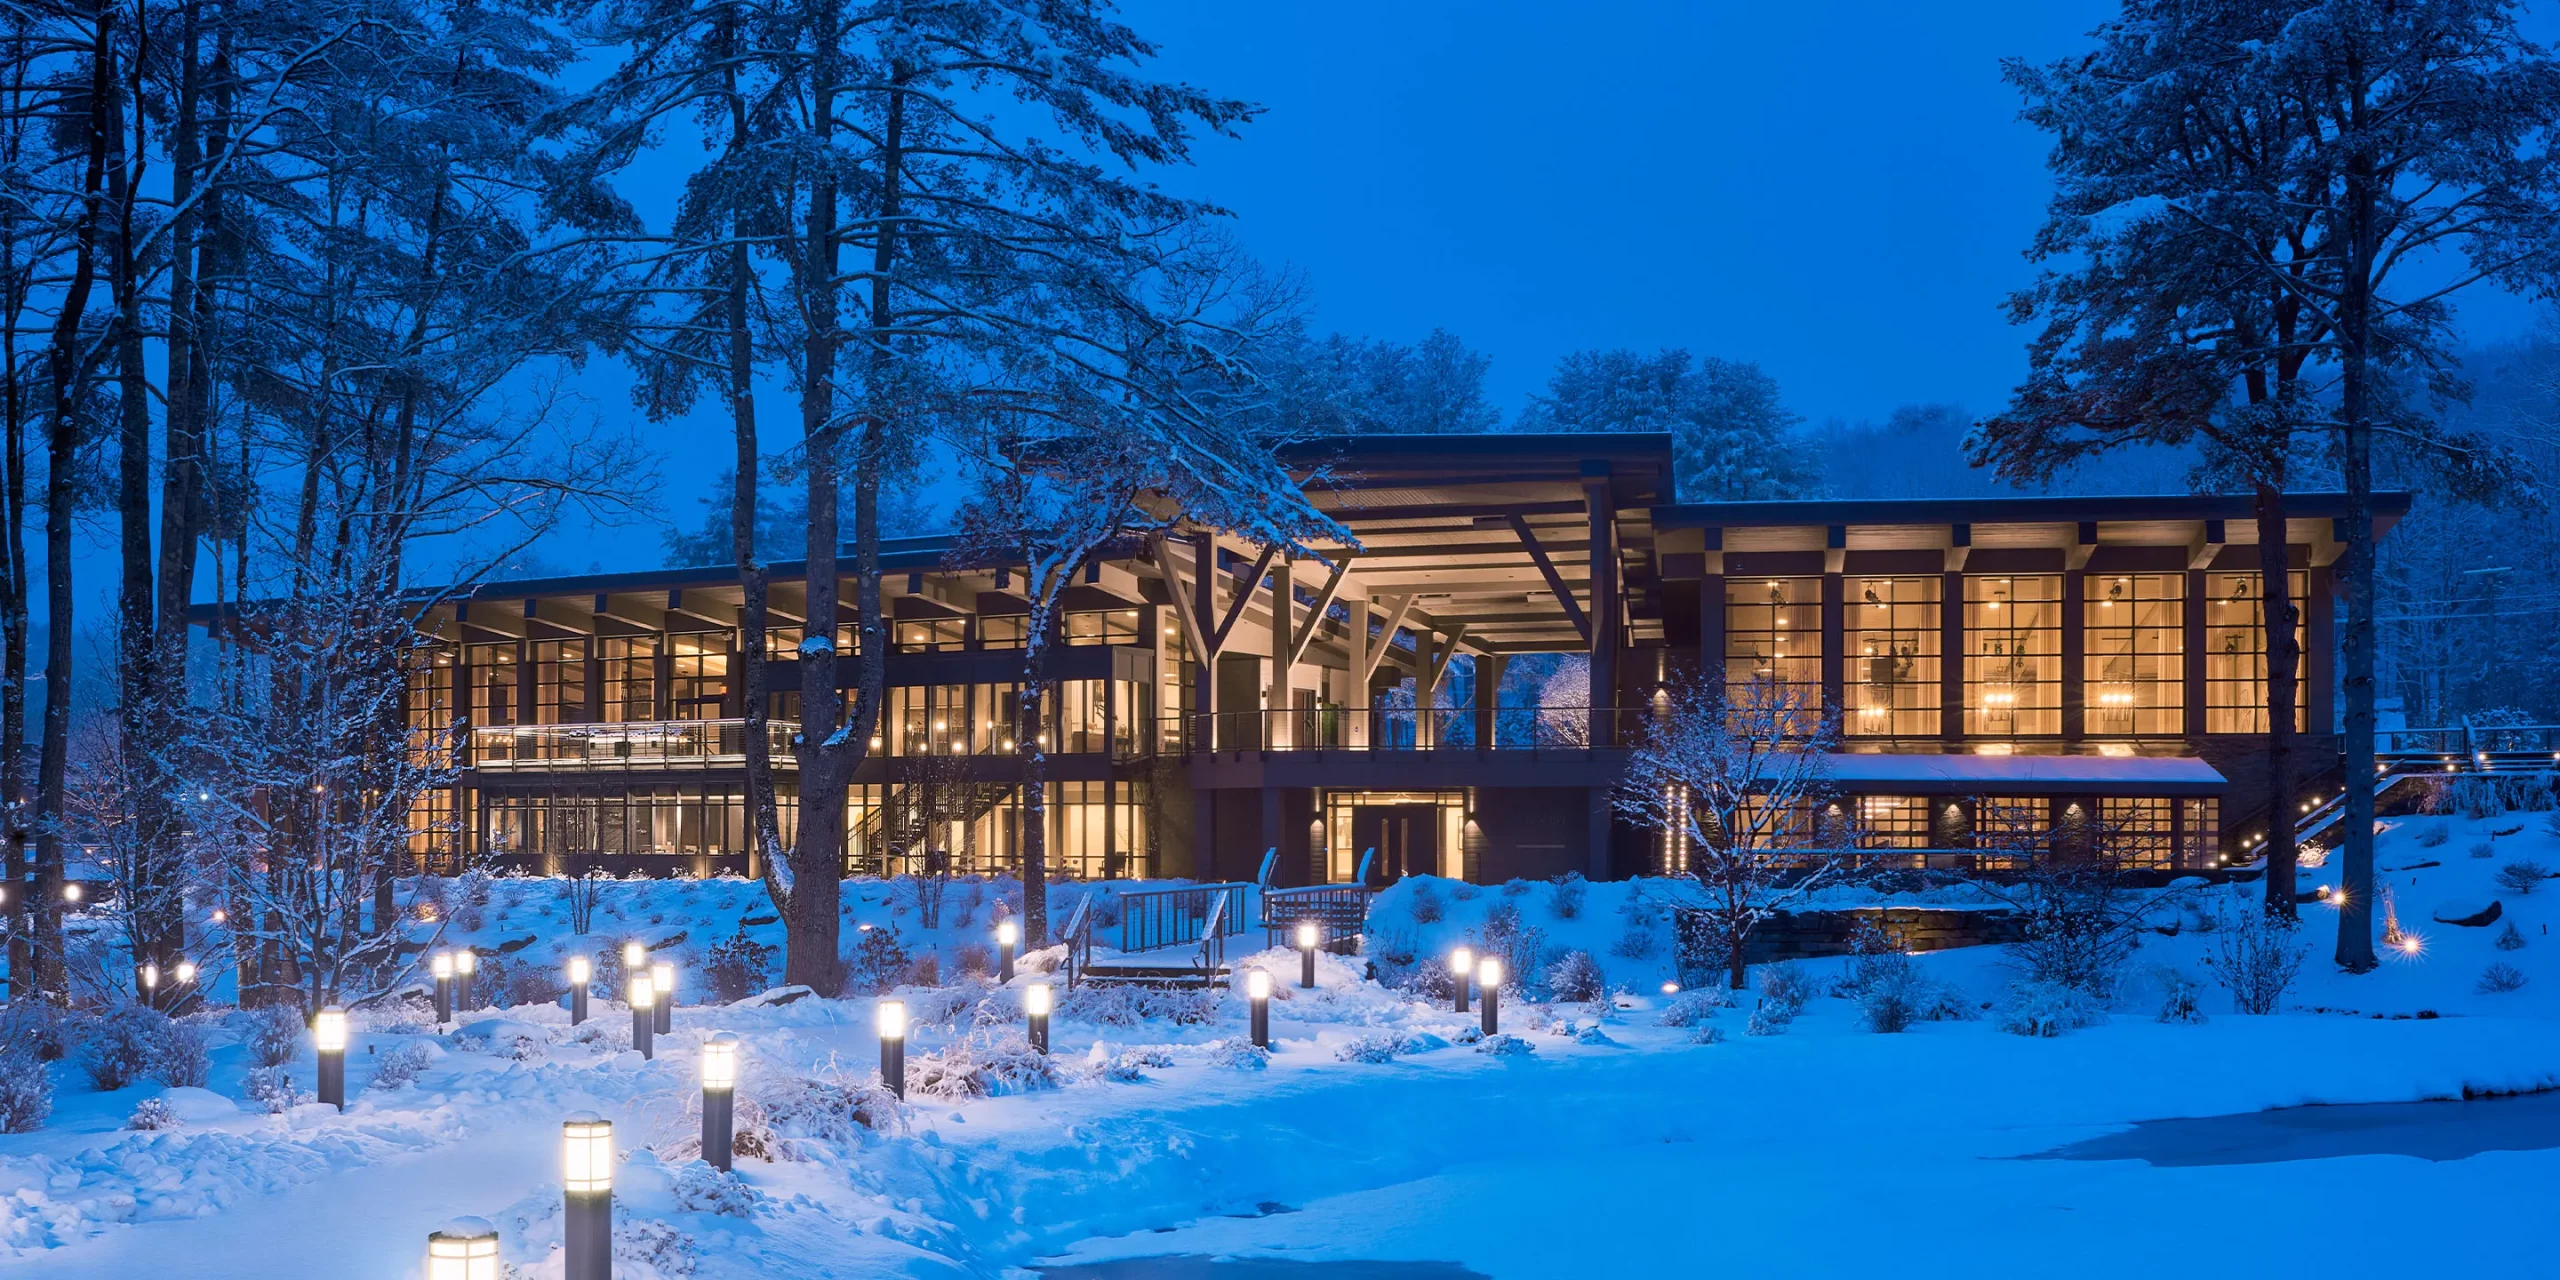 The Eldred Preserve Resort, Exterior view in the snow